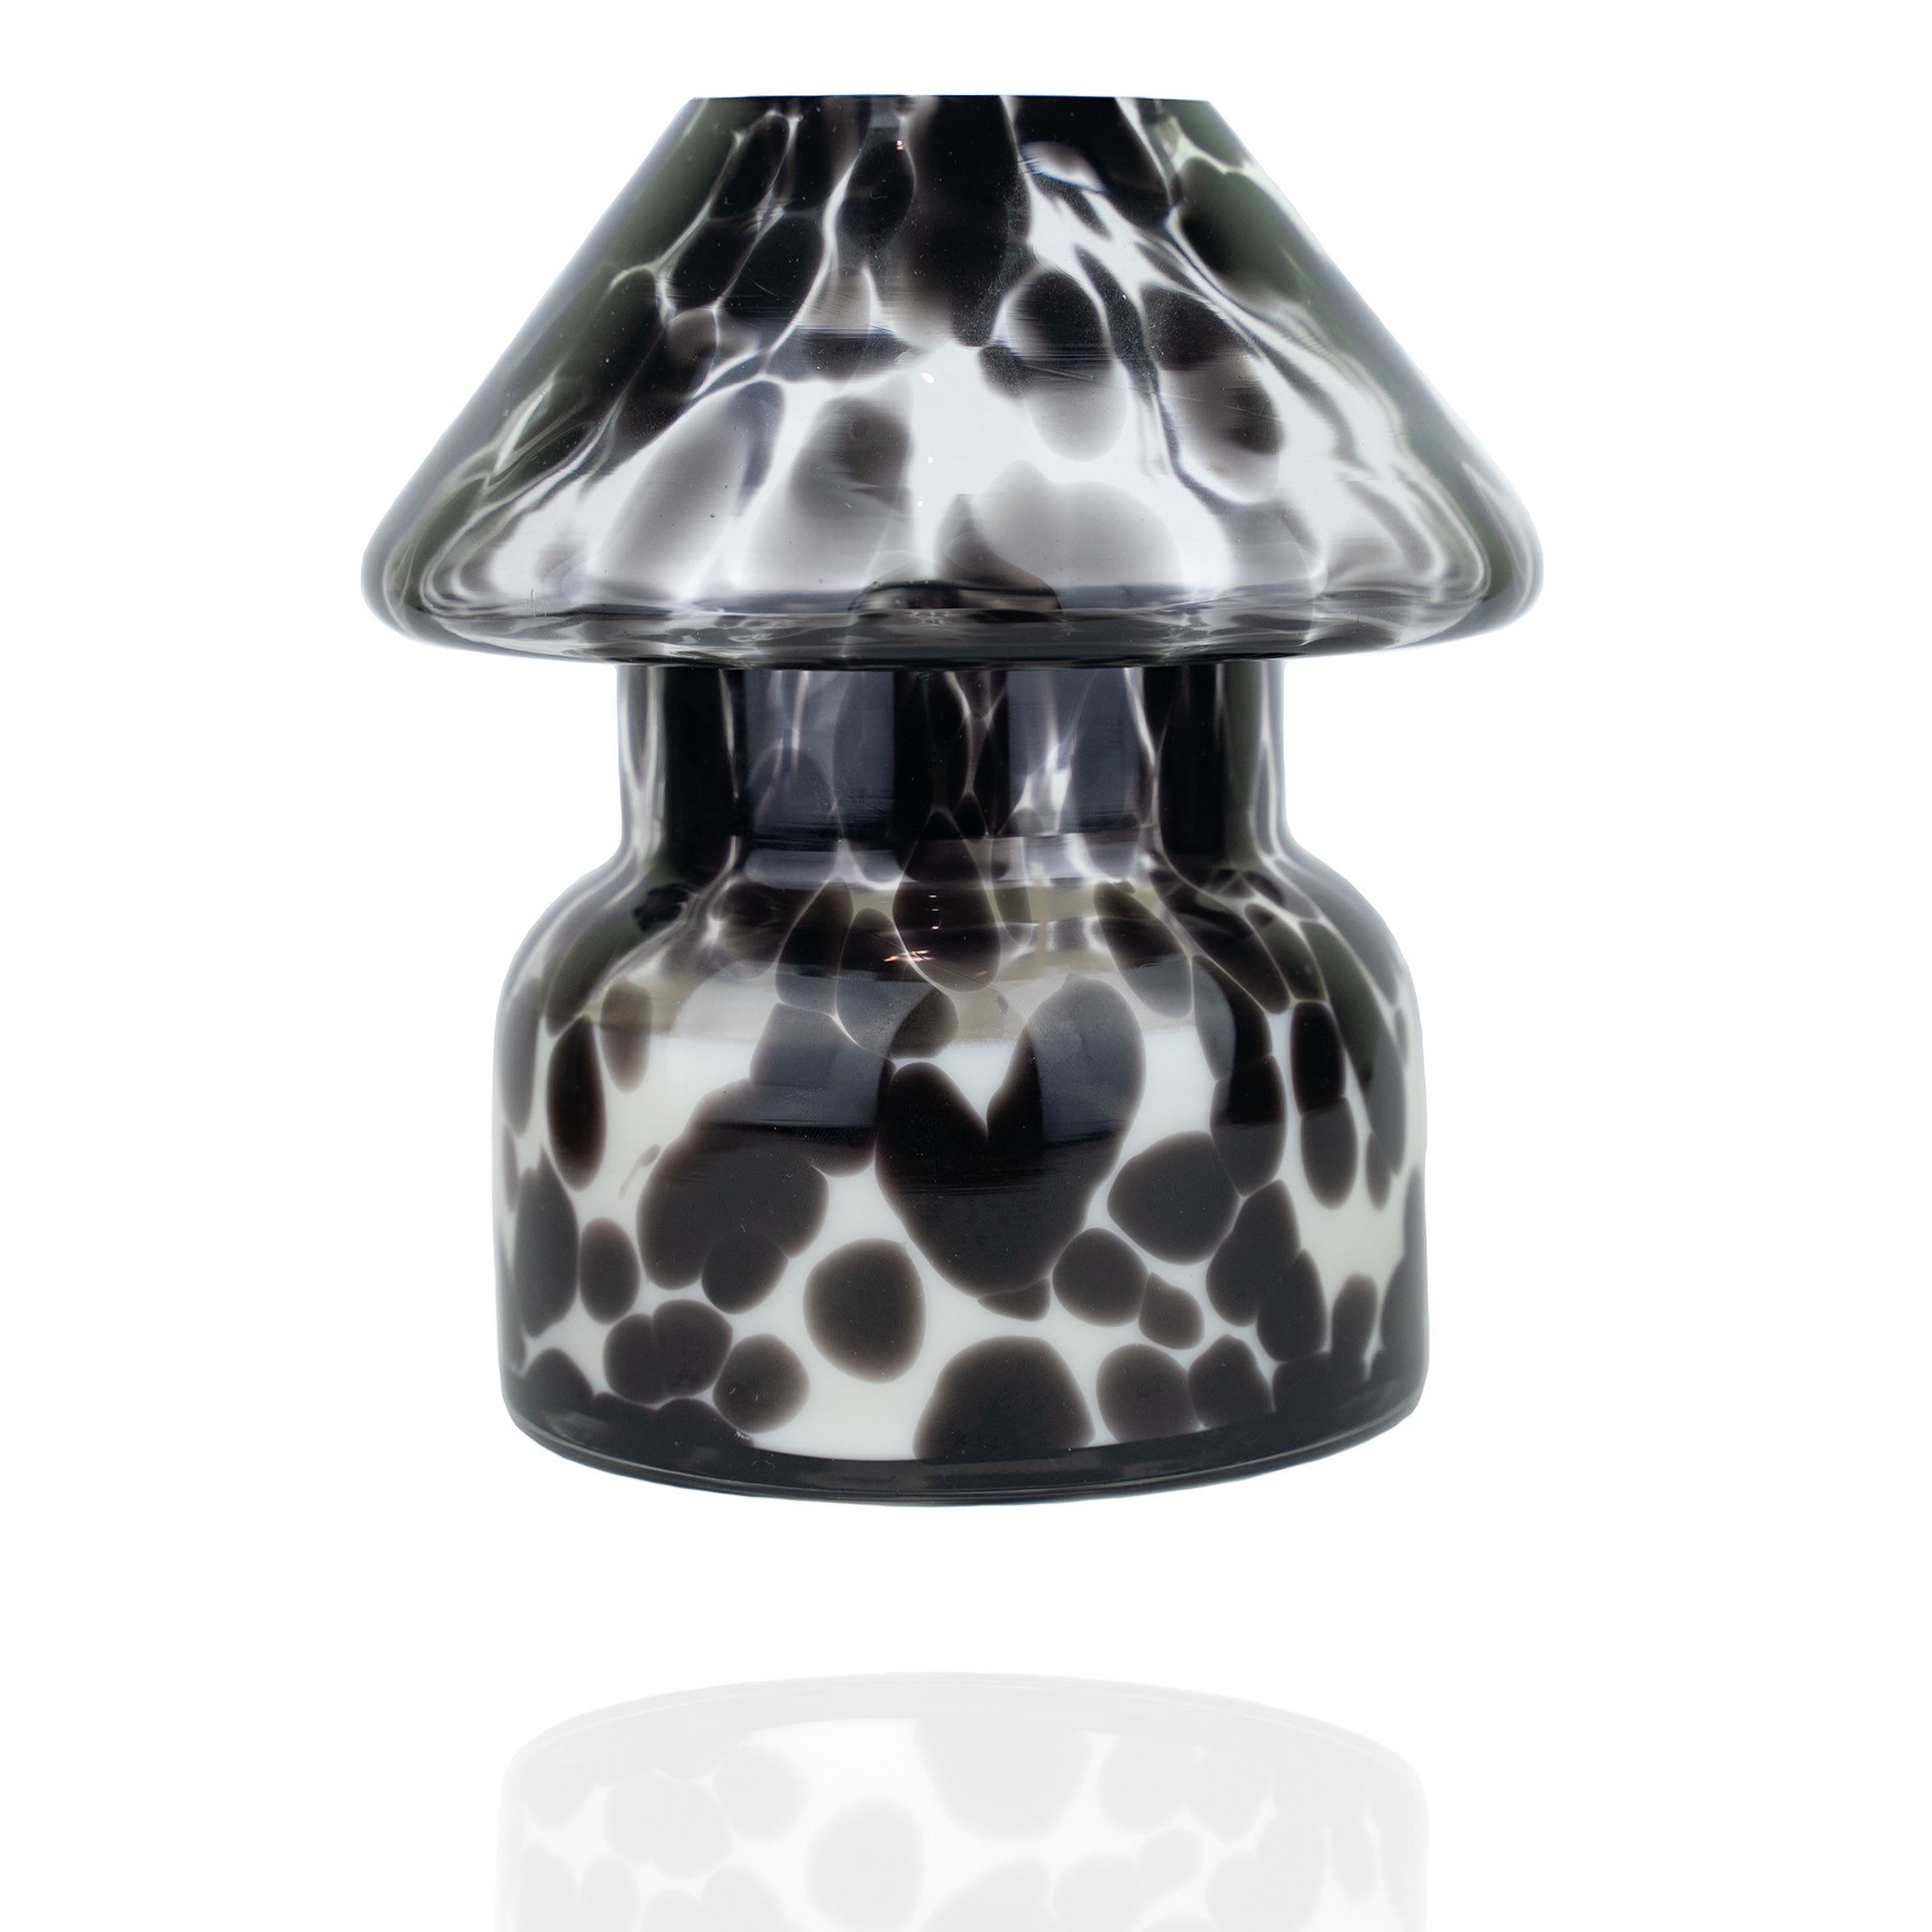 Dalmation spotted black glass mushroom candle lamp. Filled with 100% soy wax.